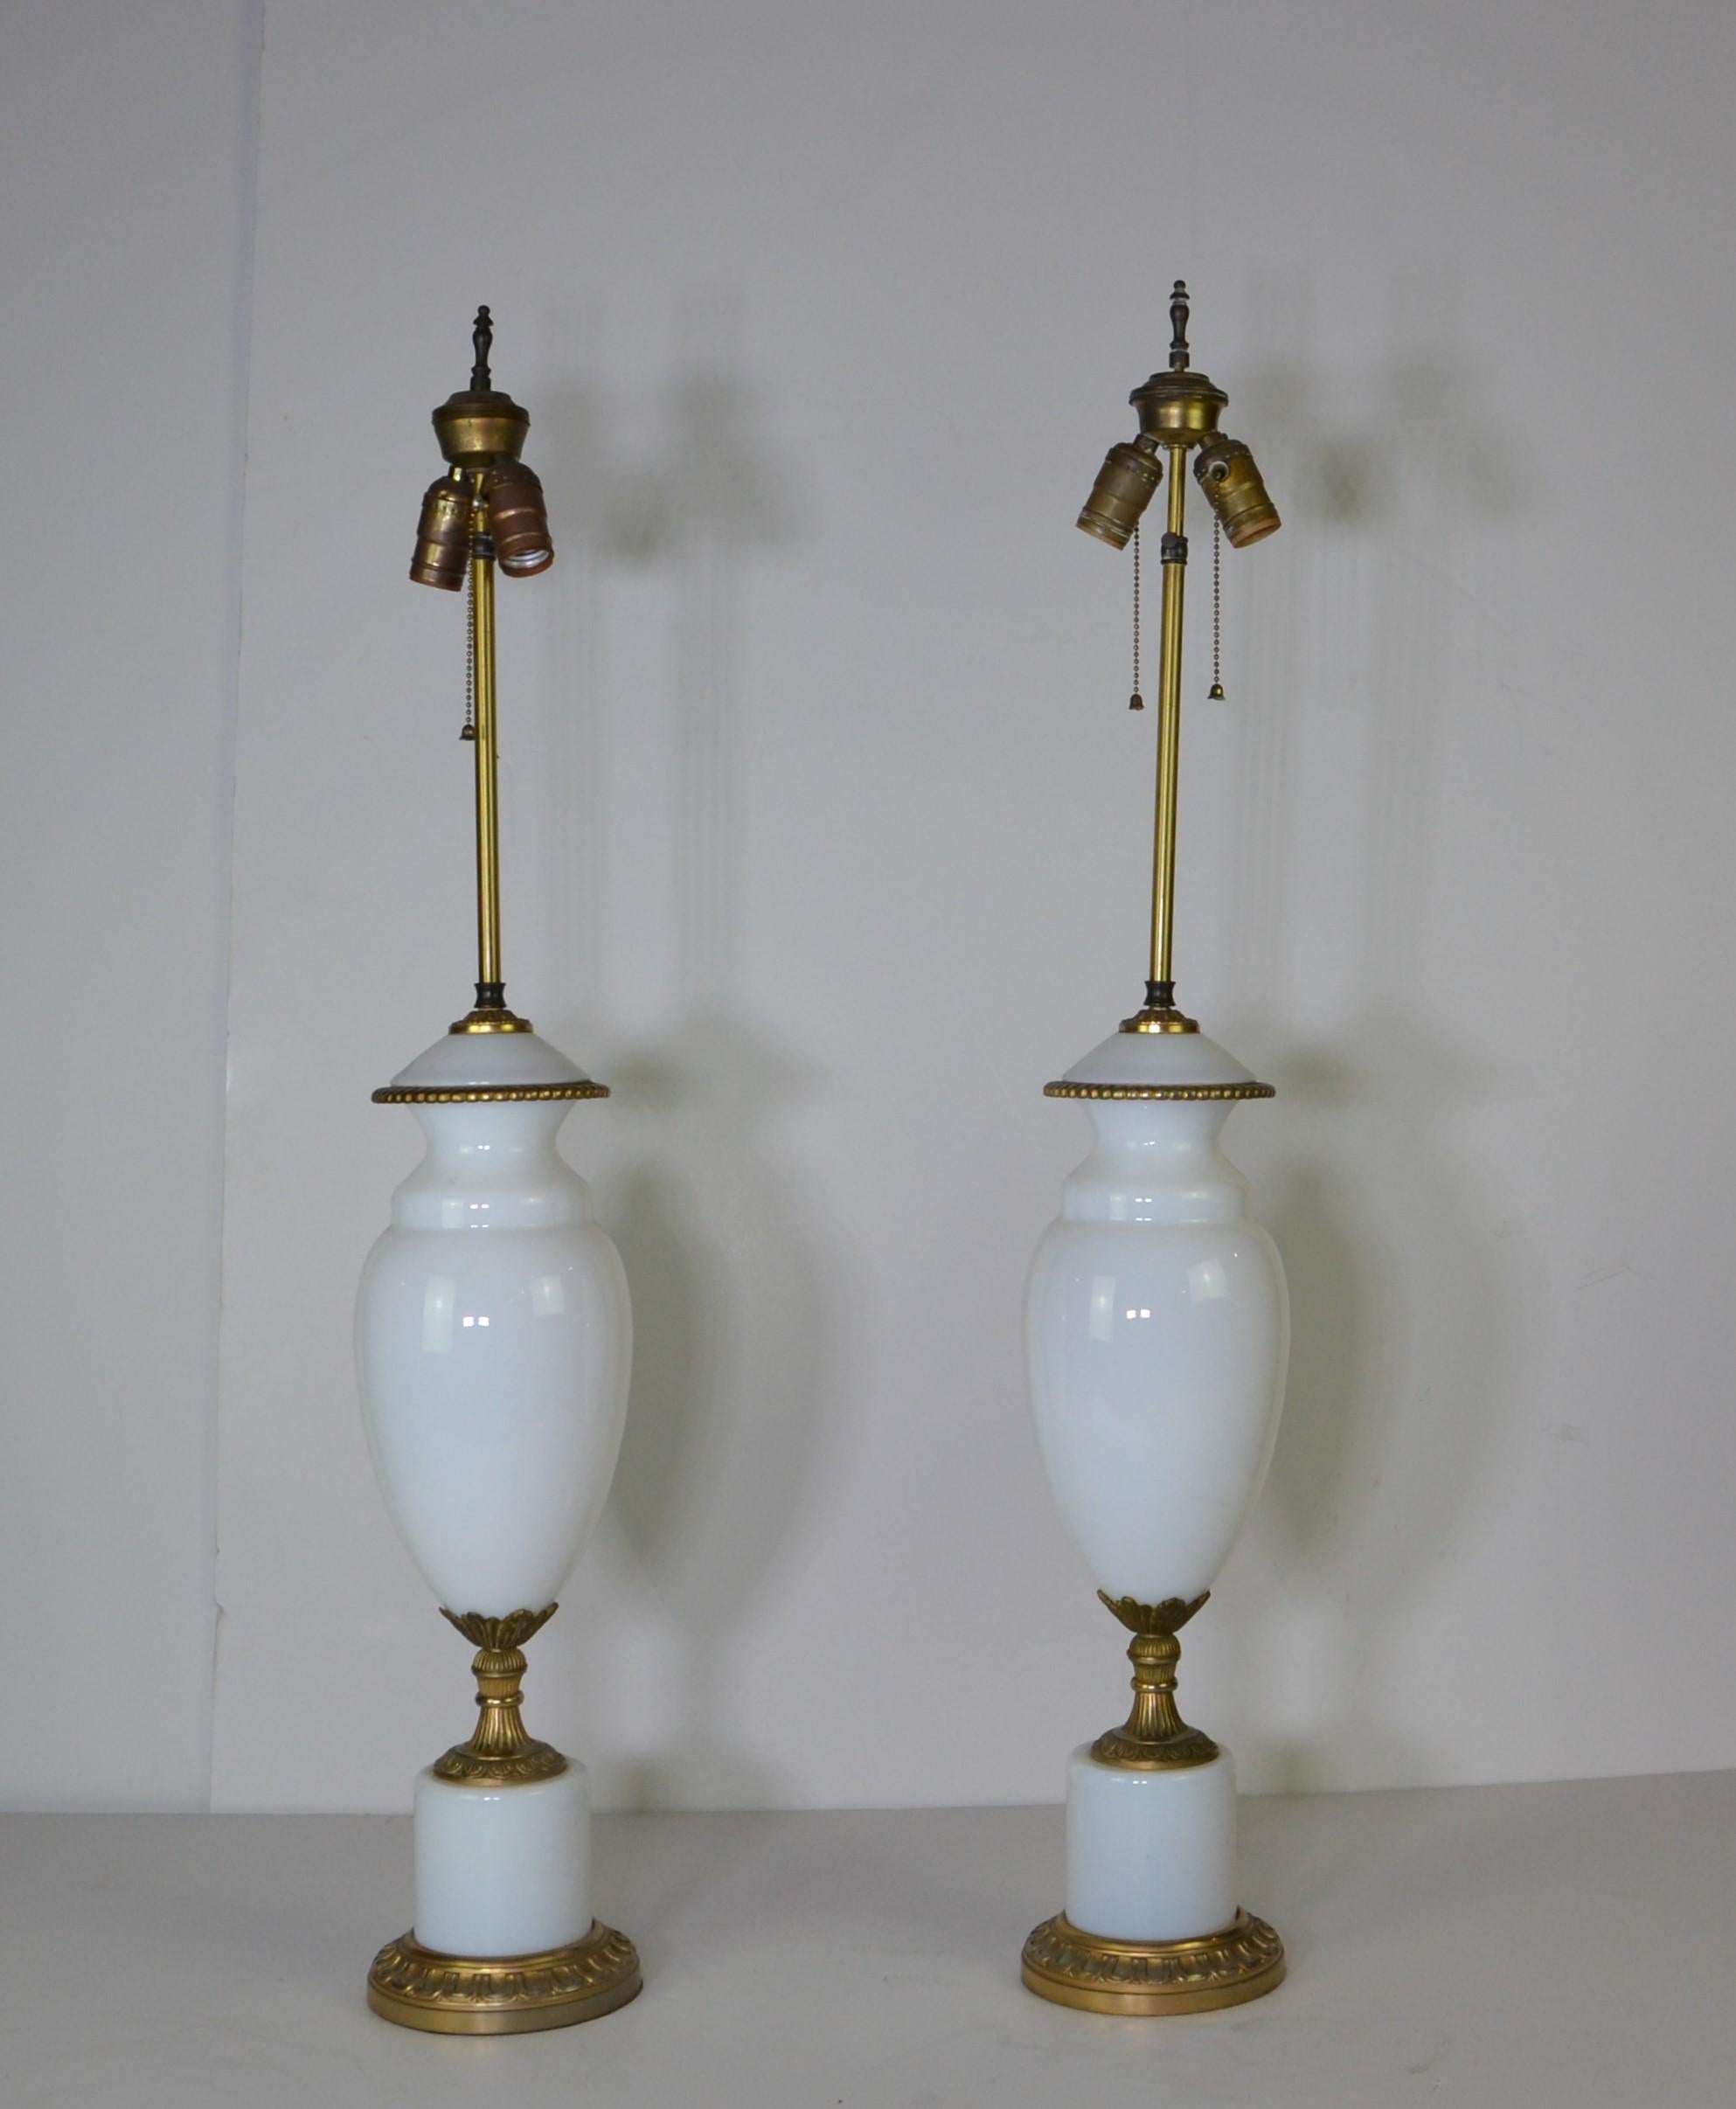 Pair of European white color glass urn lamps. The base and the gold details are brass.